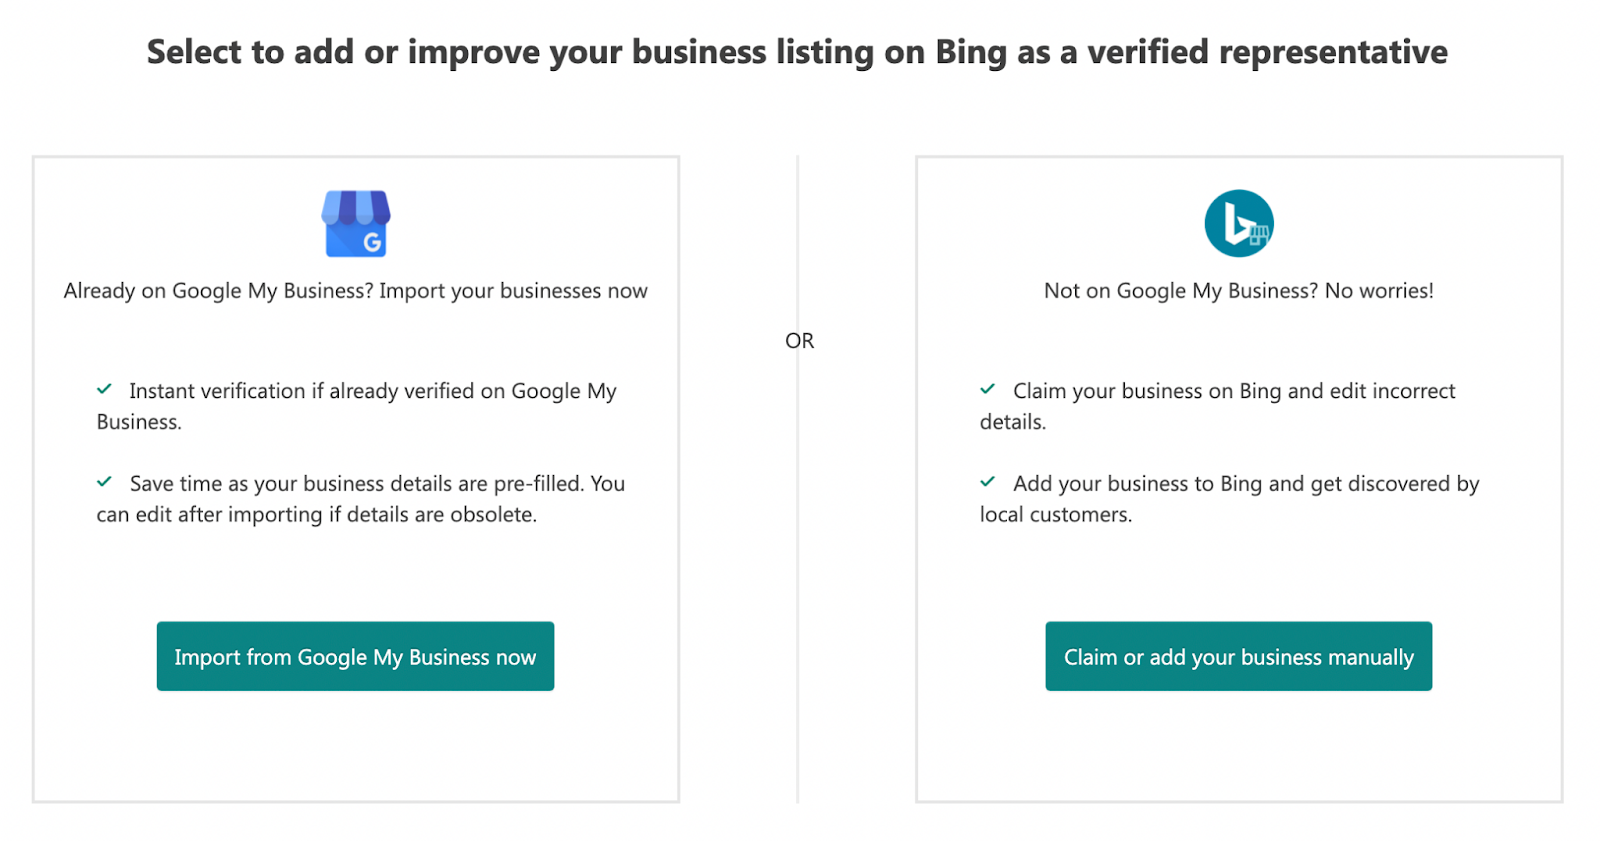 "Select to add or improve your business listing on Bing as a verified representative" page